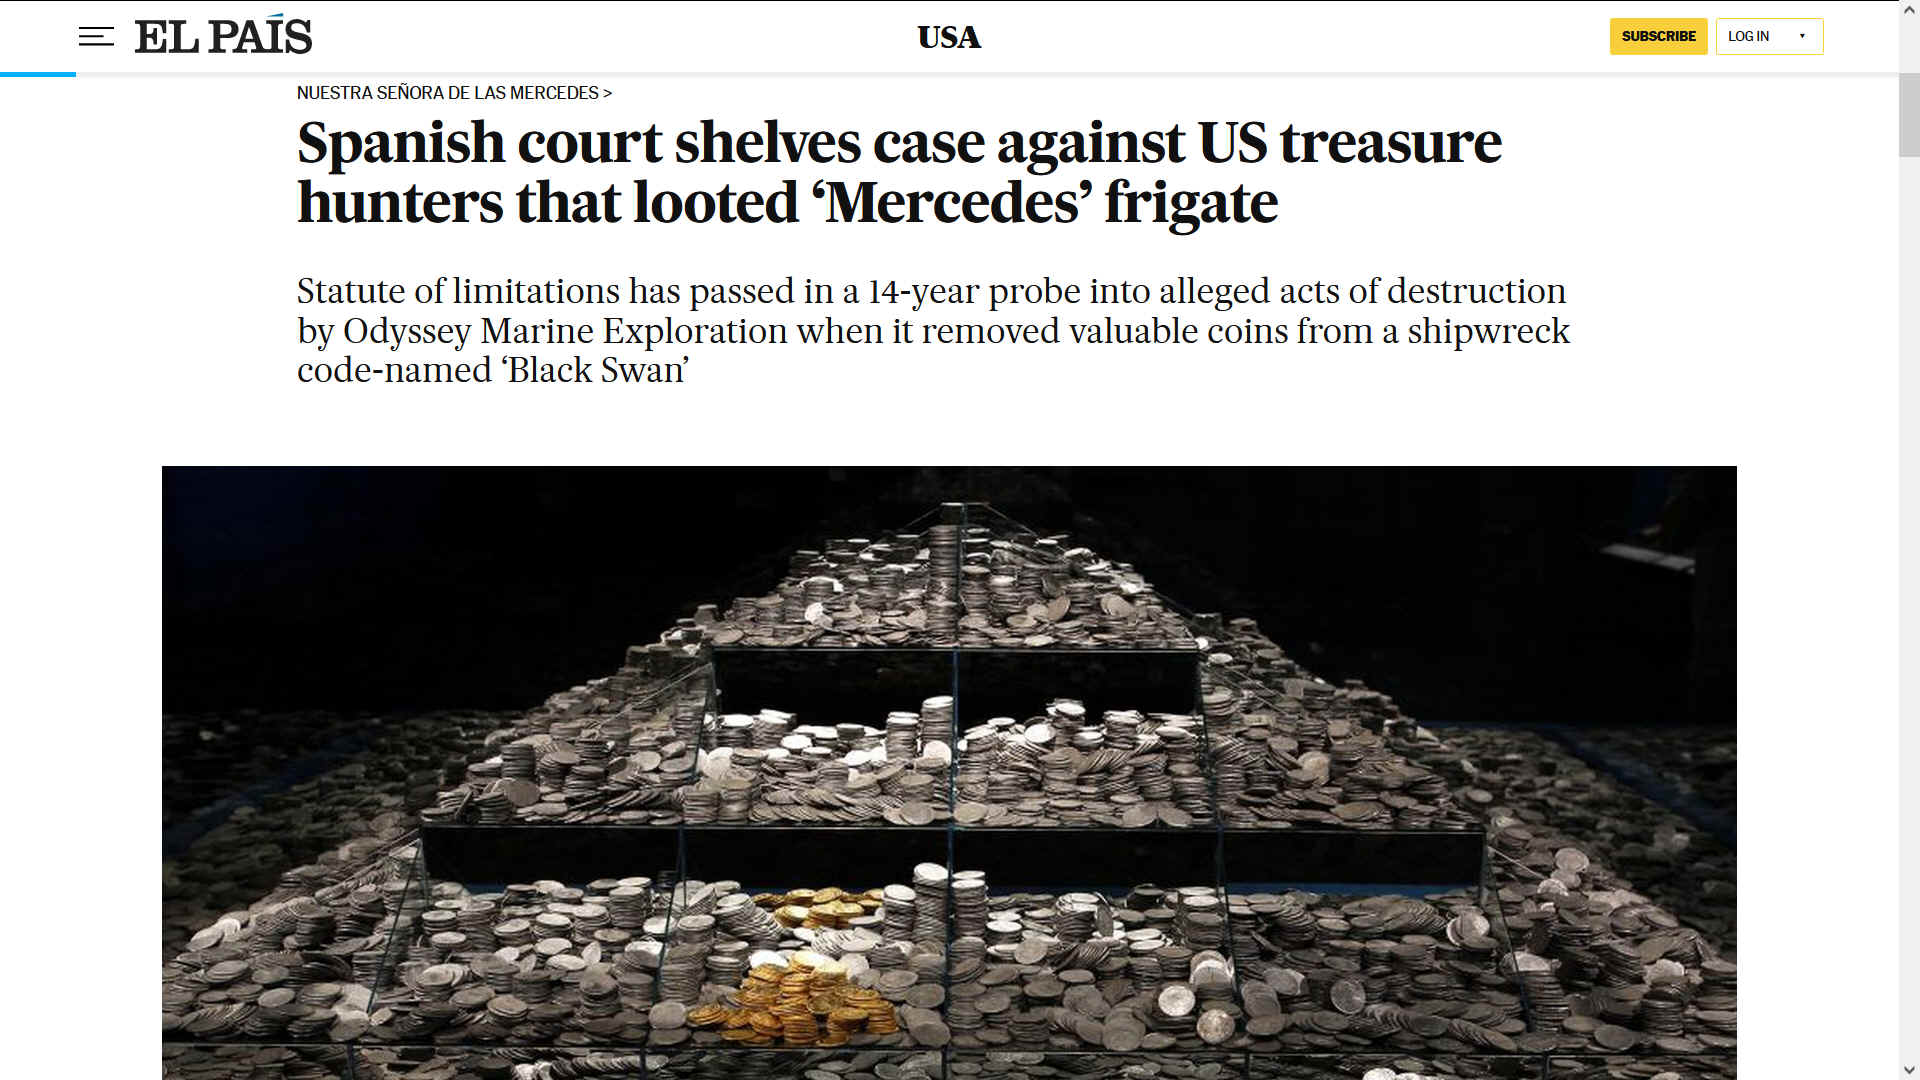 Spain wins case against Odyssey treasure hunters, Florida, US Court finding for the Spanish gevernment